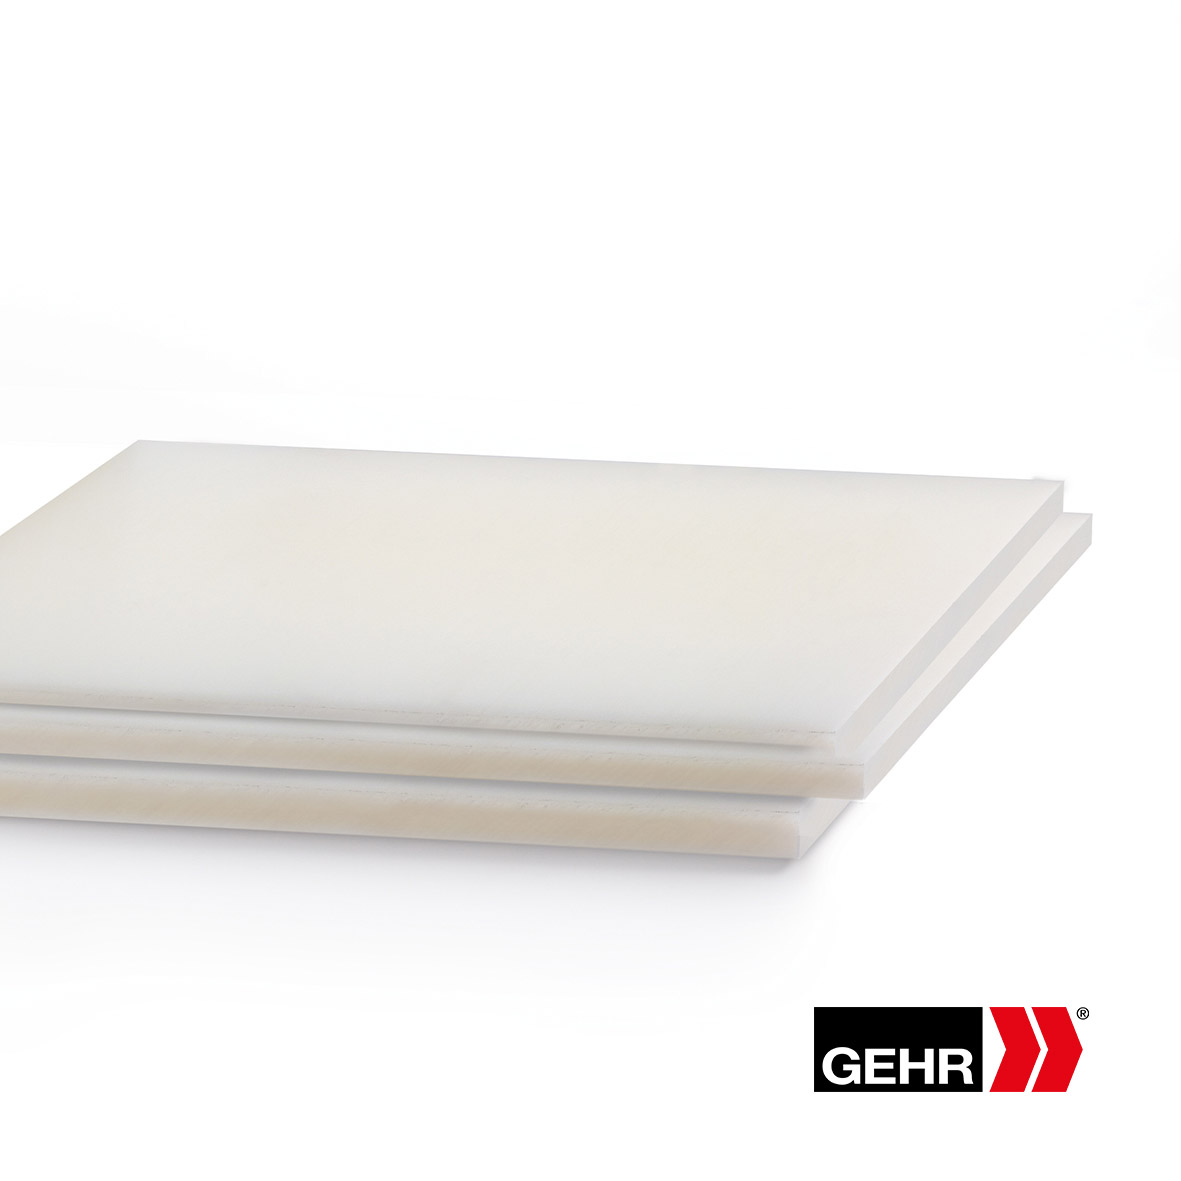 GEHR POM-ESD 9 Sheets 610 x 30 mm ivory